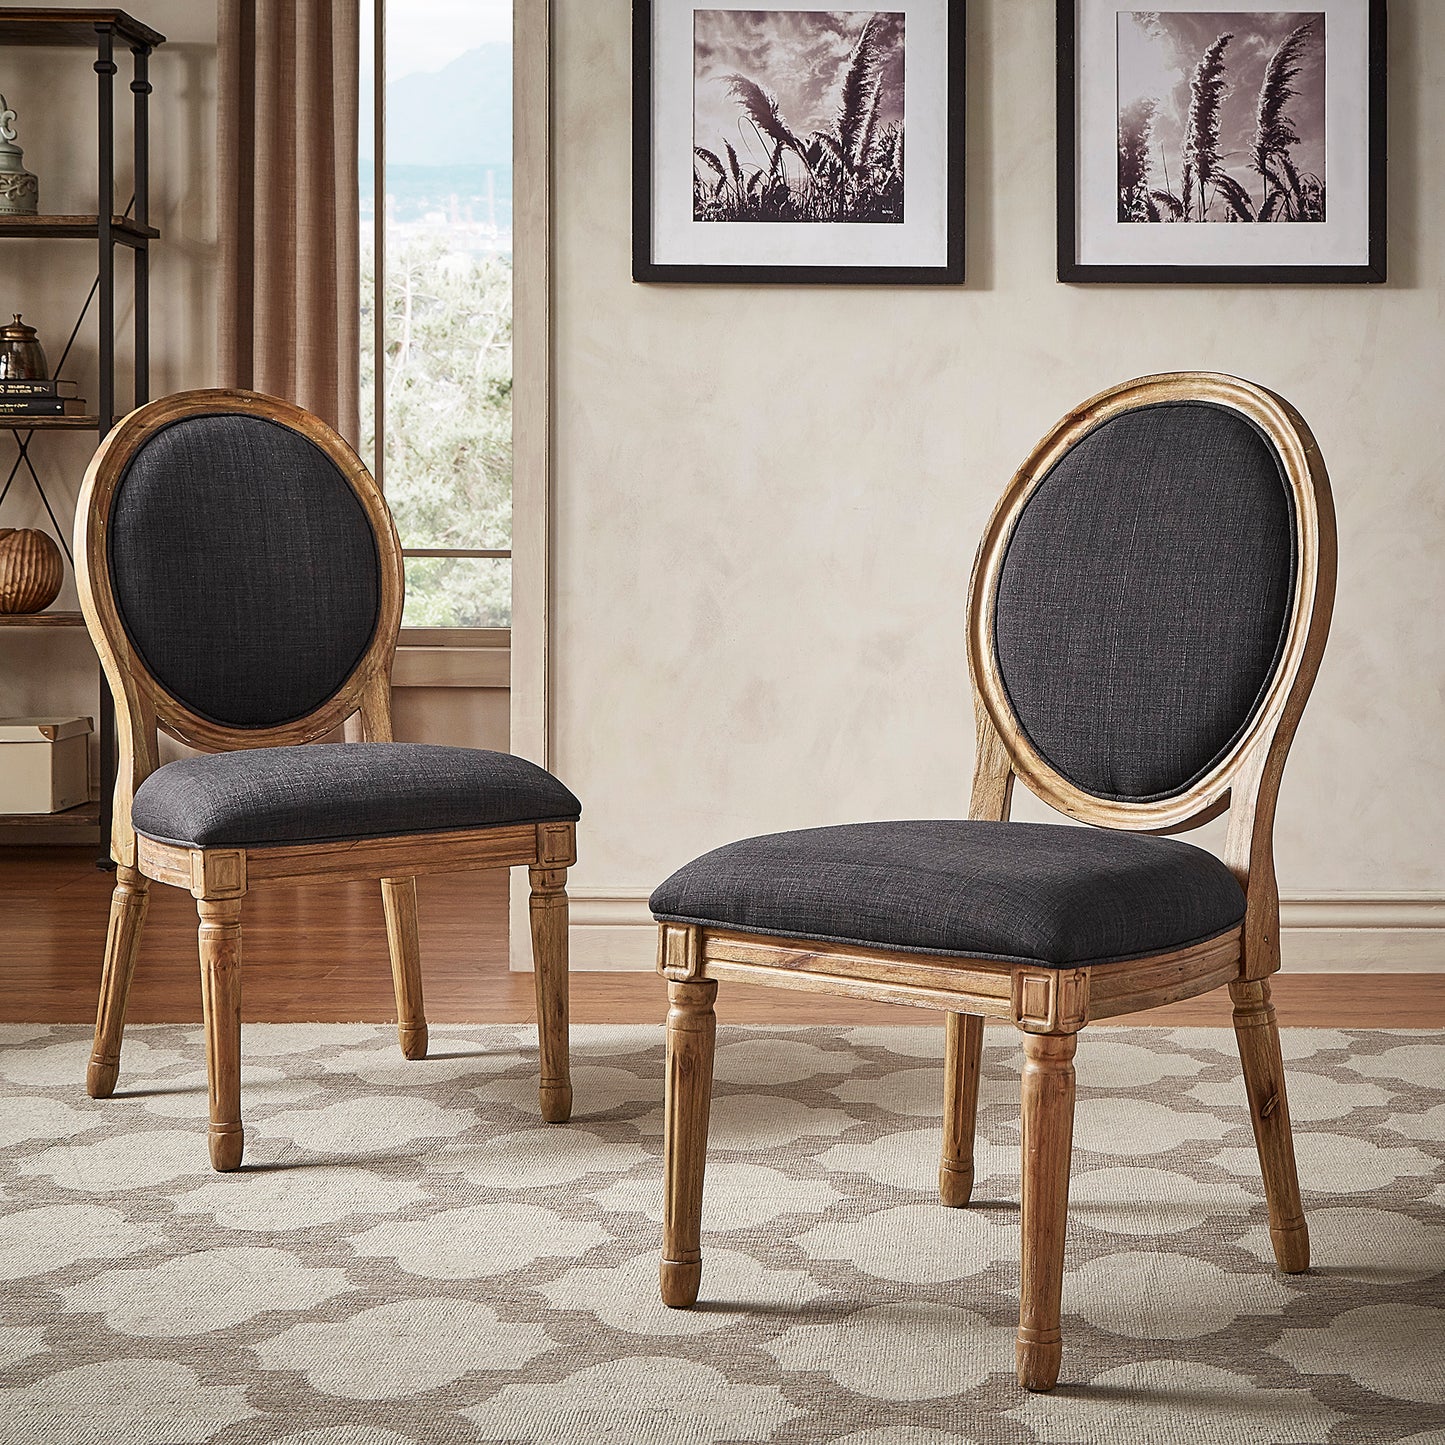 Round Linen and Wood Dining Chairs (Set of 2) - Dark Grey Linen, Natural Finish